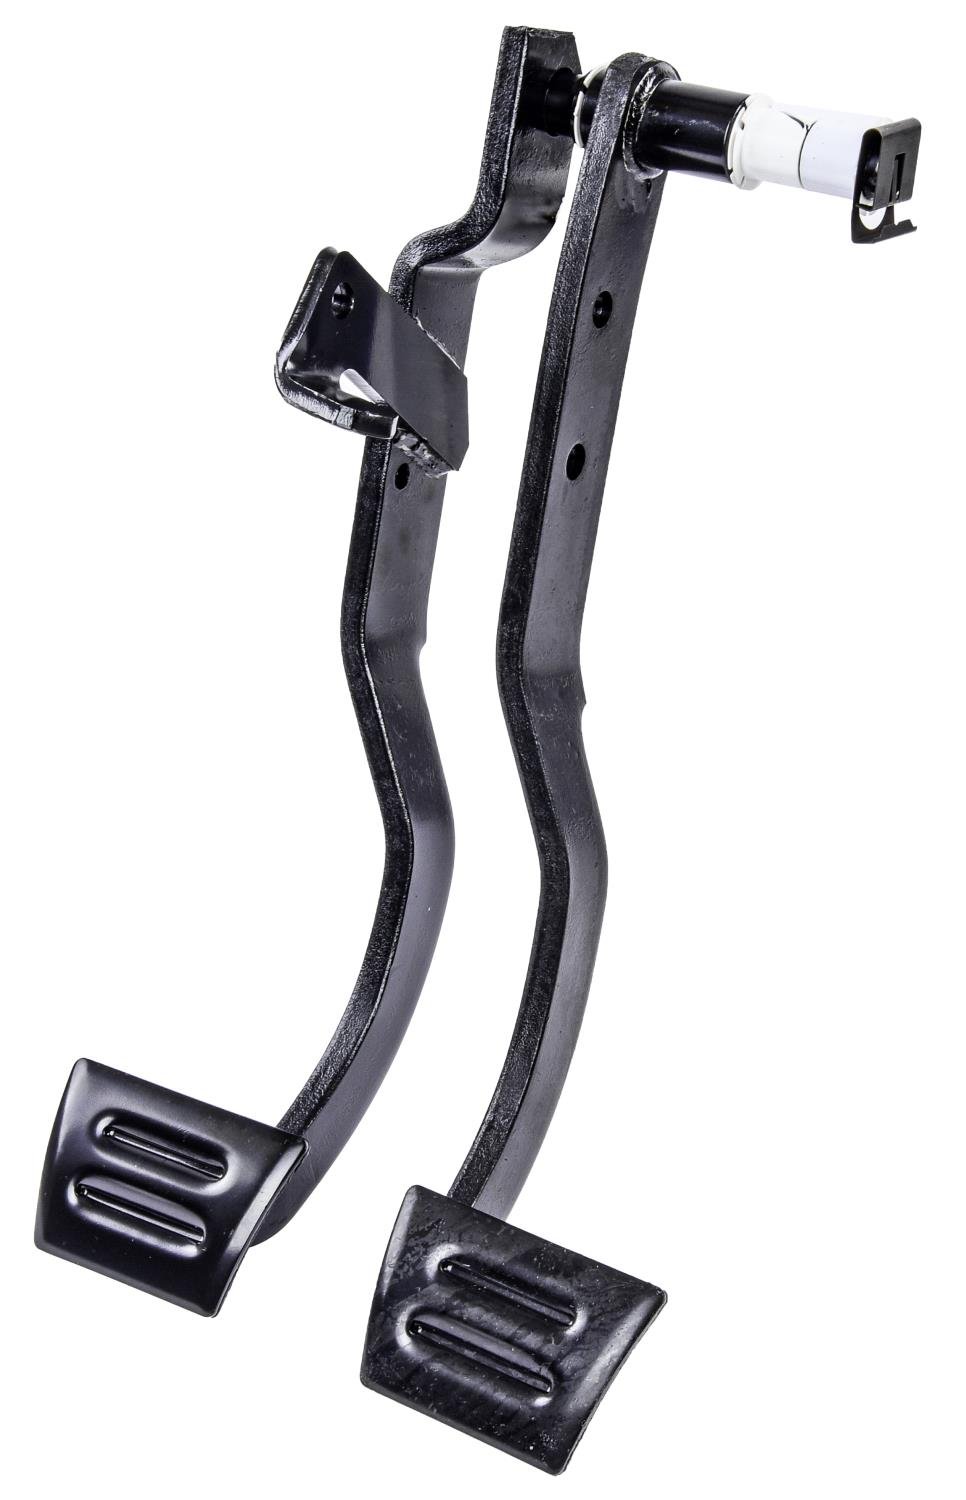 Brake & Clutch Pedal Assembly for 1964-1966 Chevrolet Chevelle, El Camino